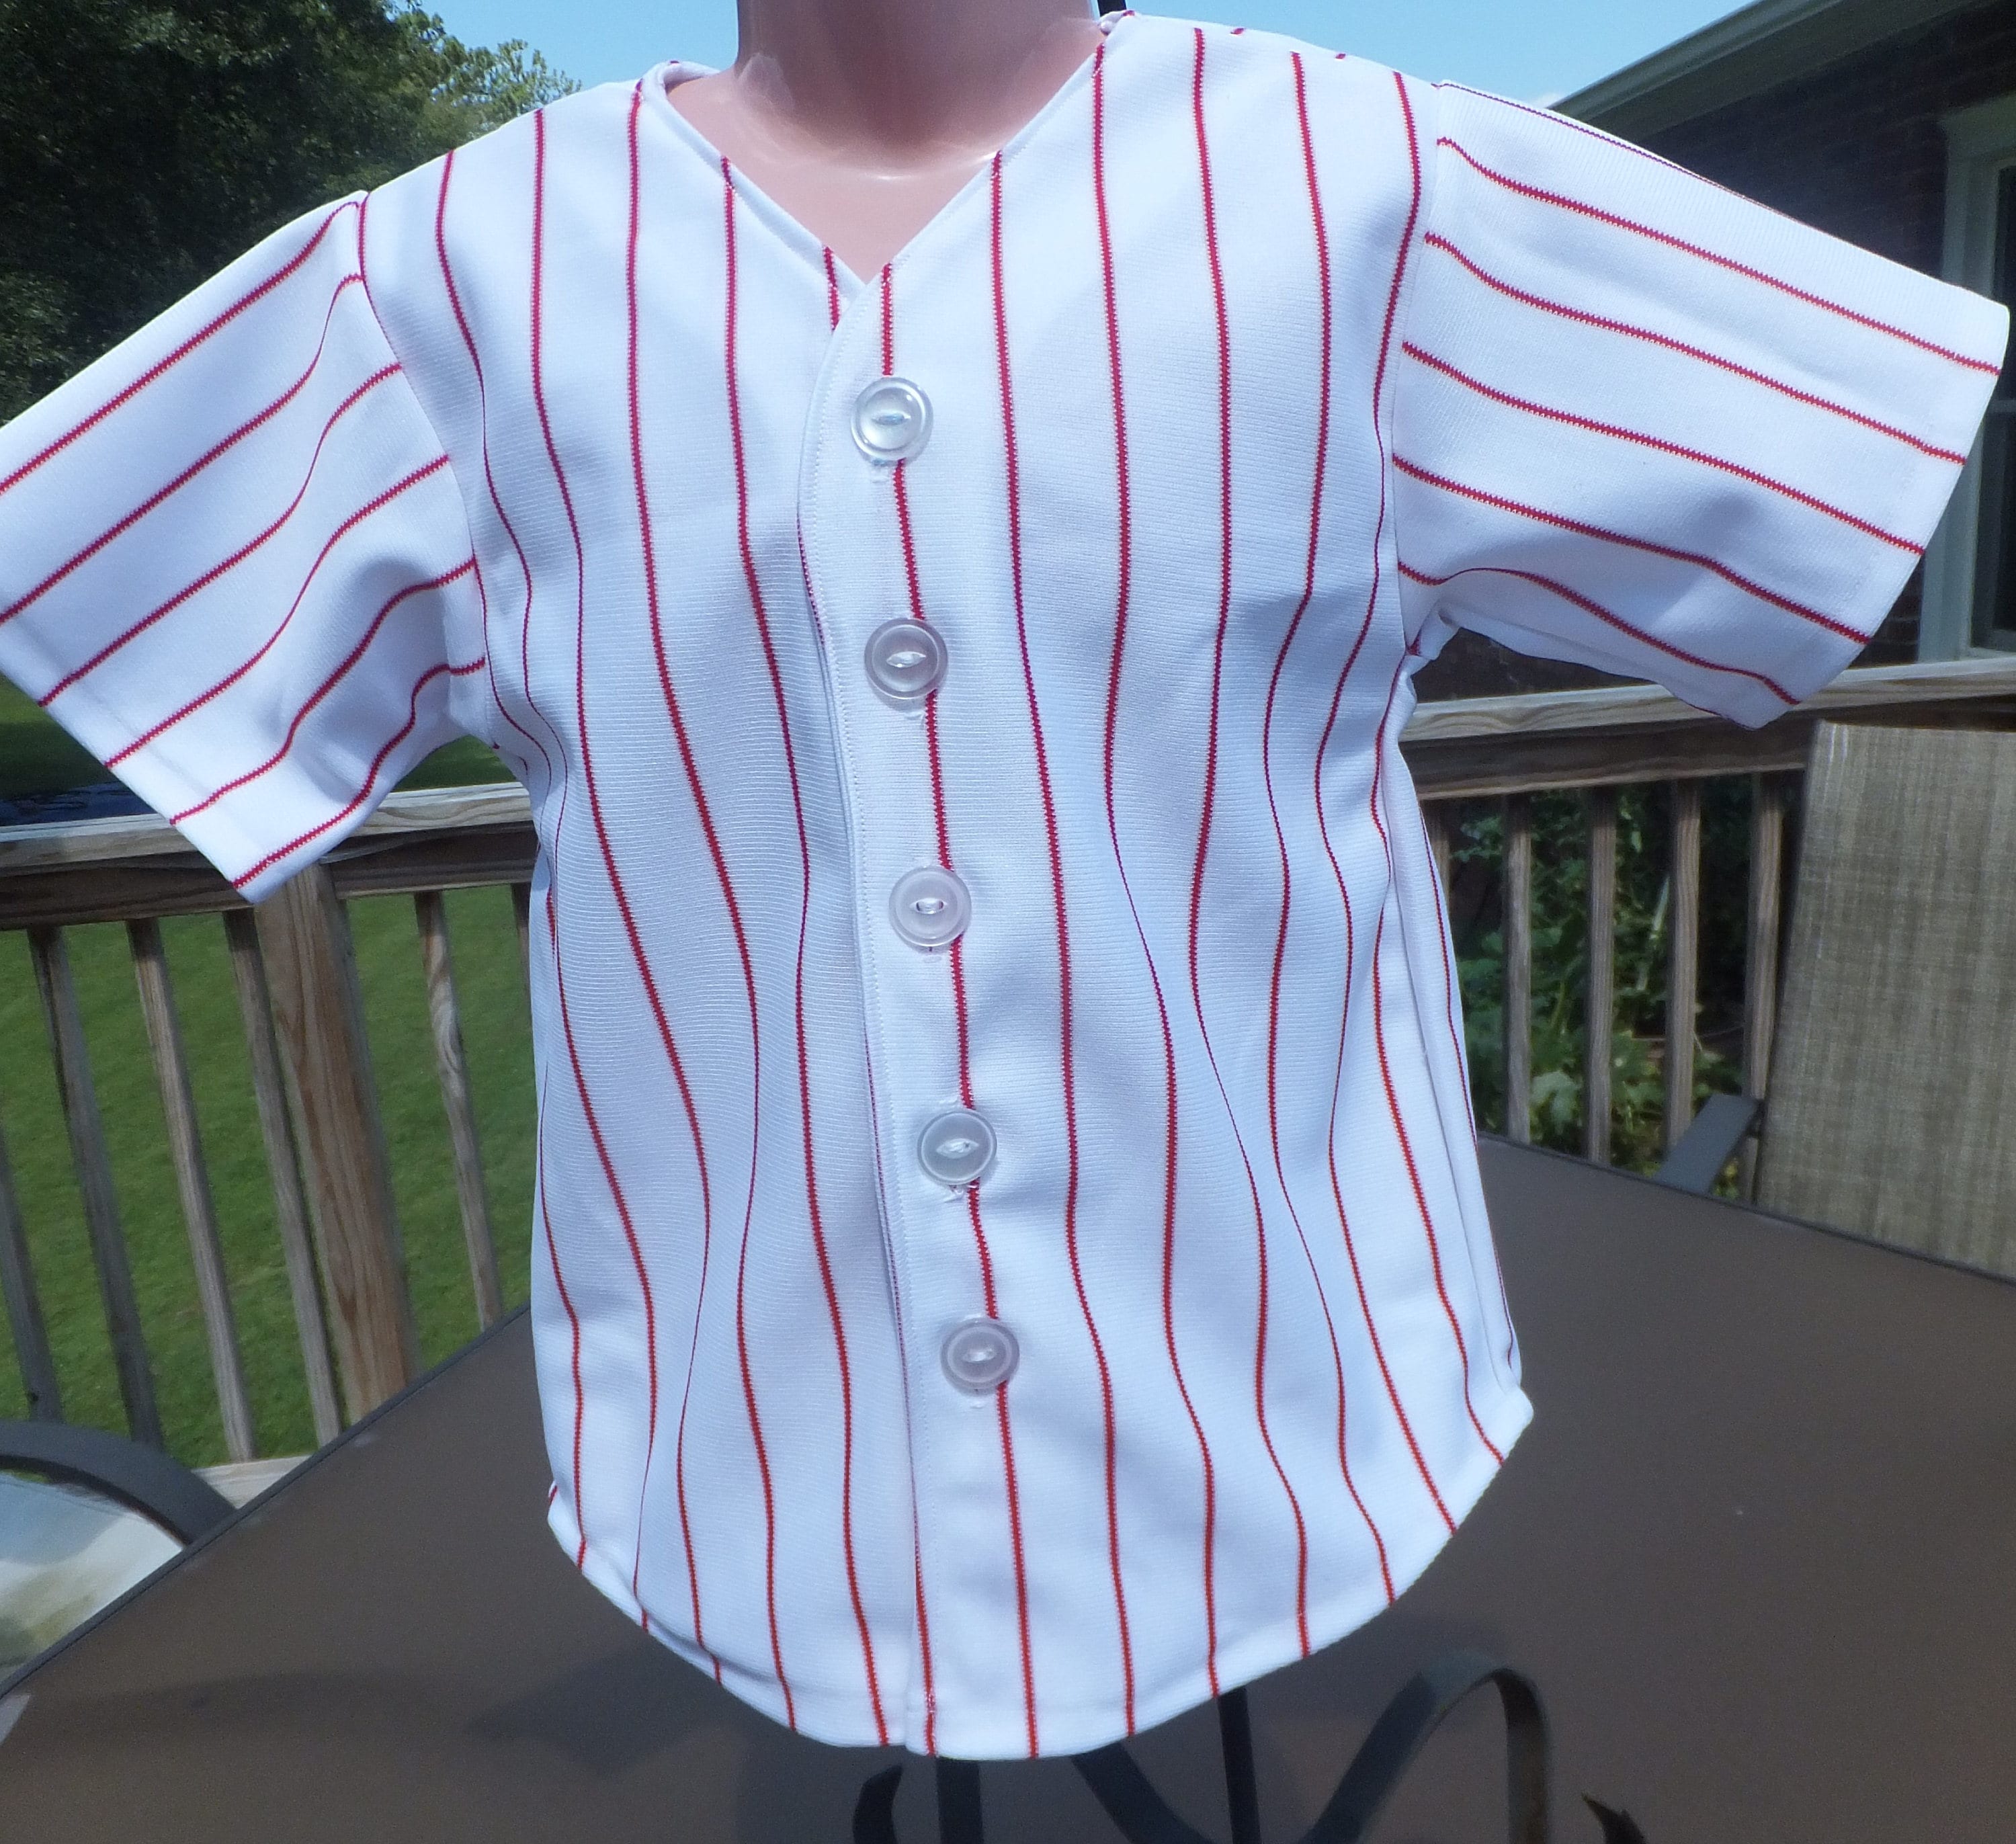 Red and White Pinstripe Knit Baseball Jersey for Infants. NB 